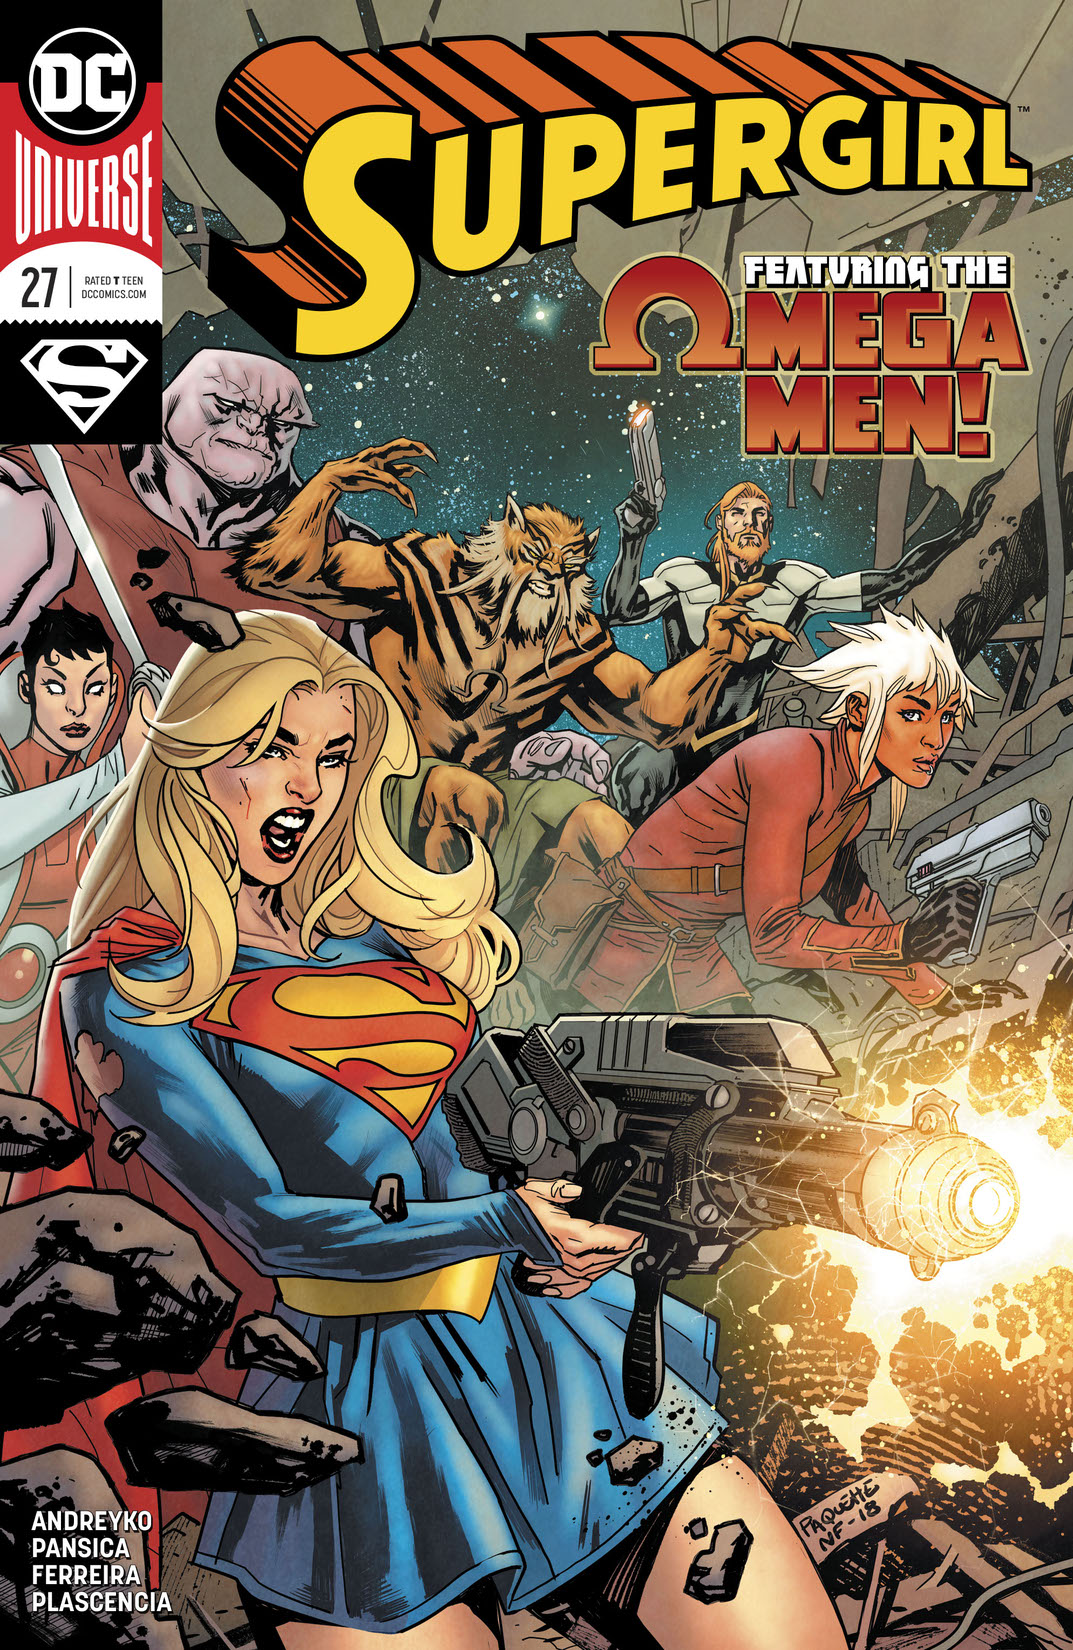 Supergirl (2016-) #27 preview images